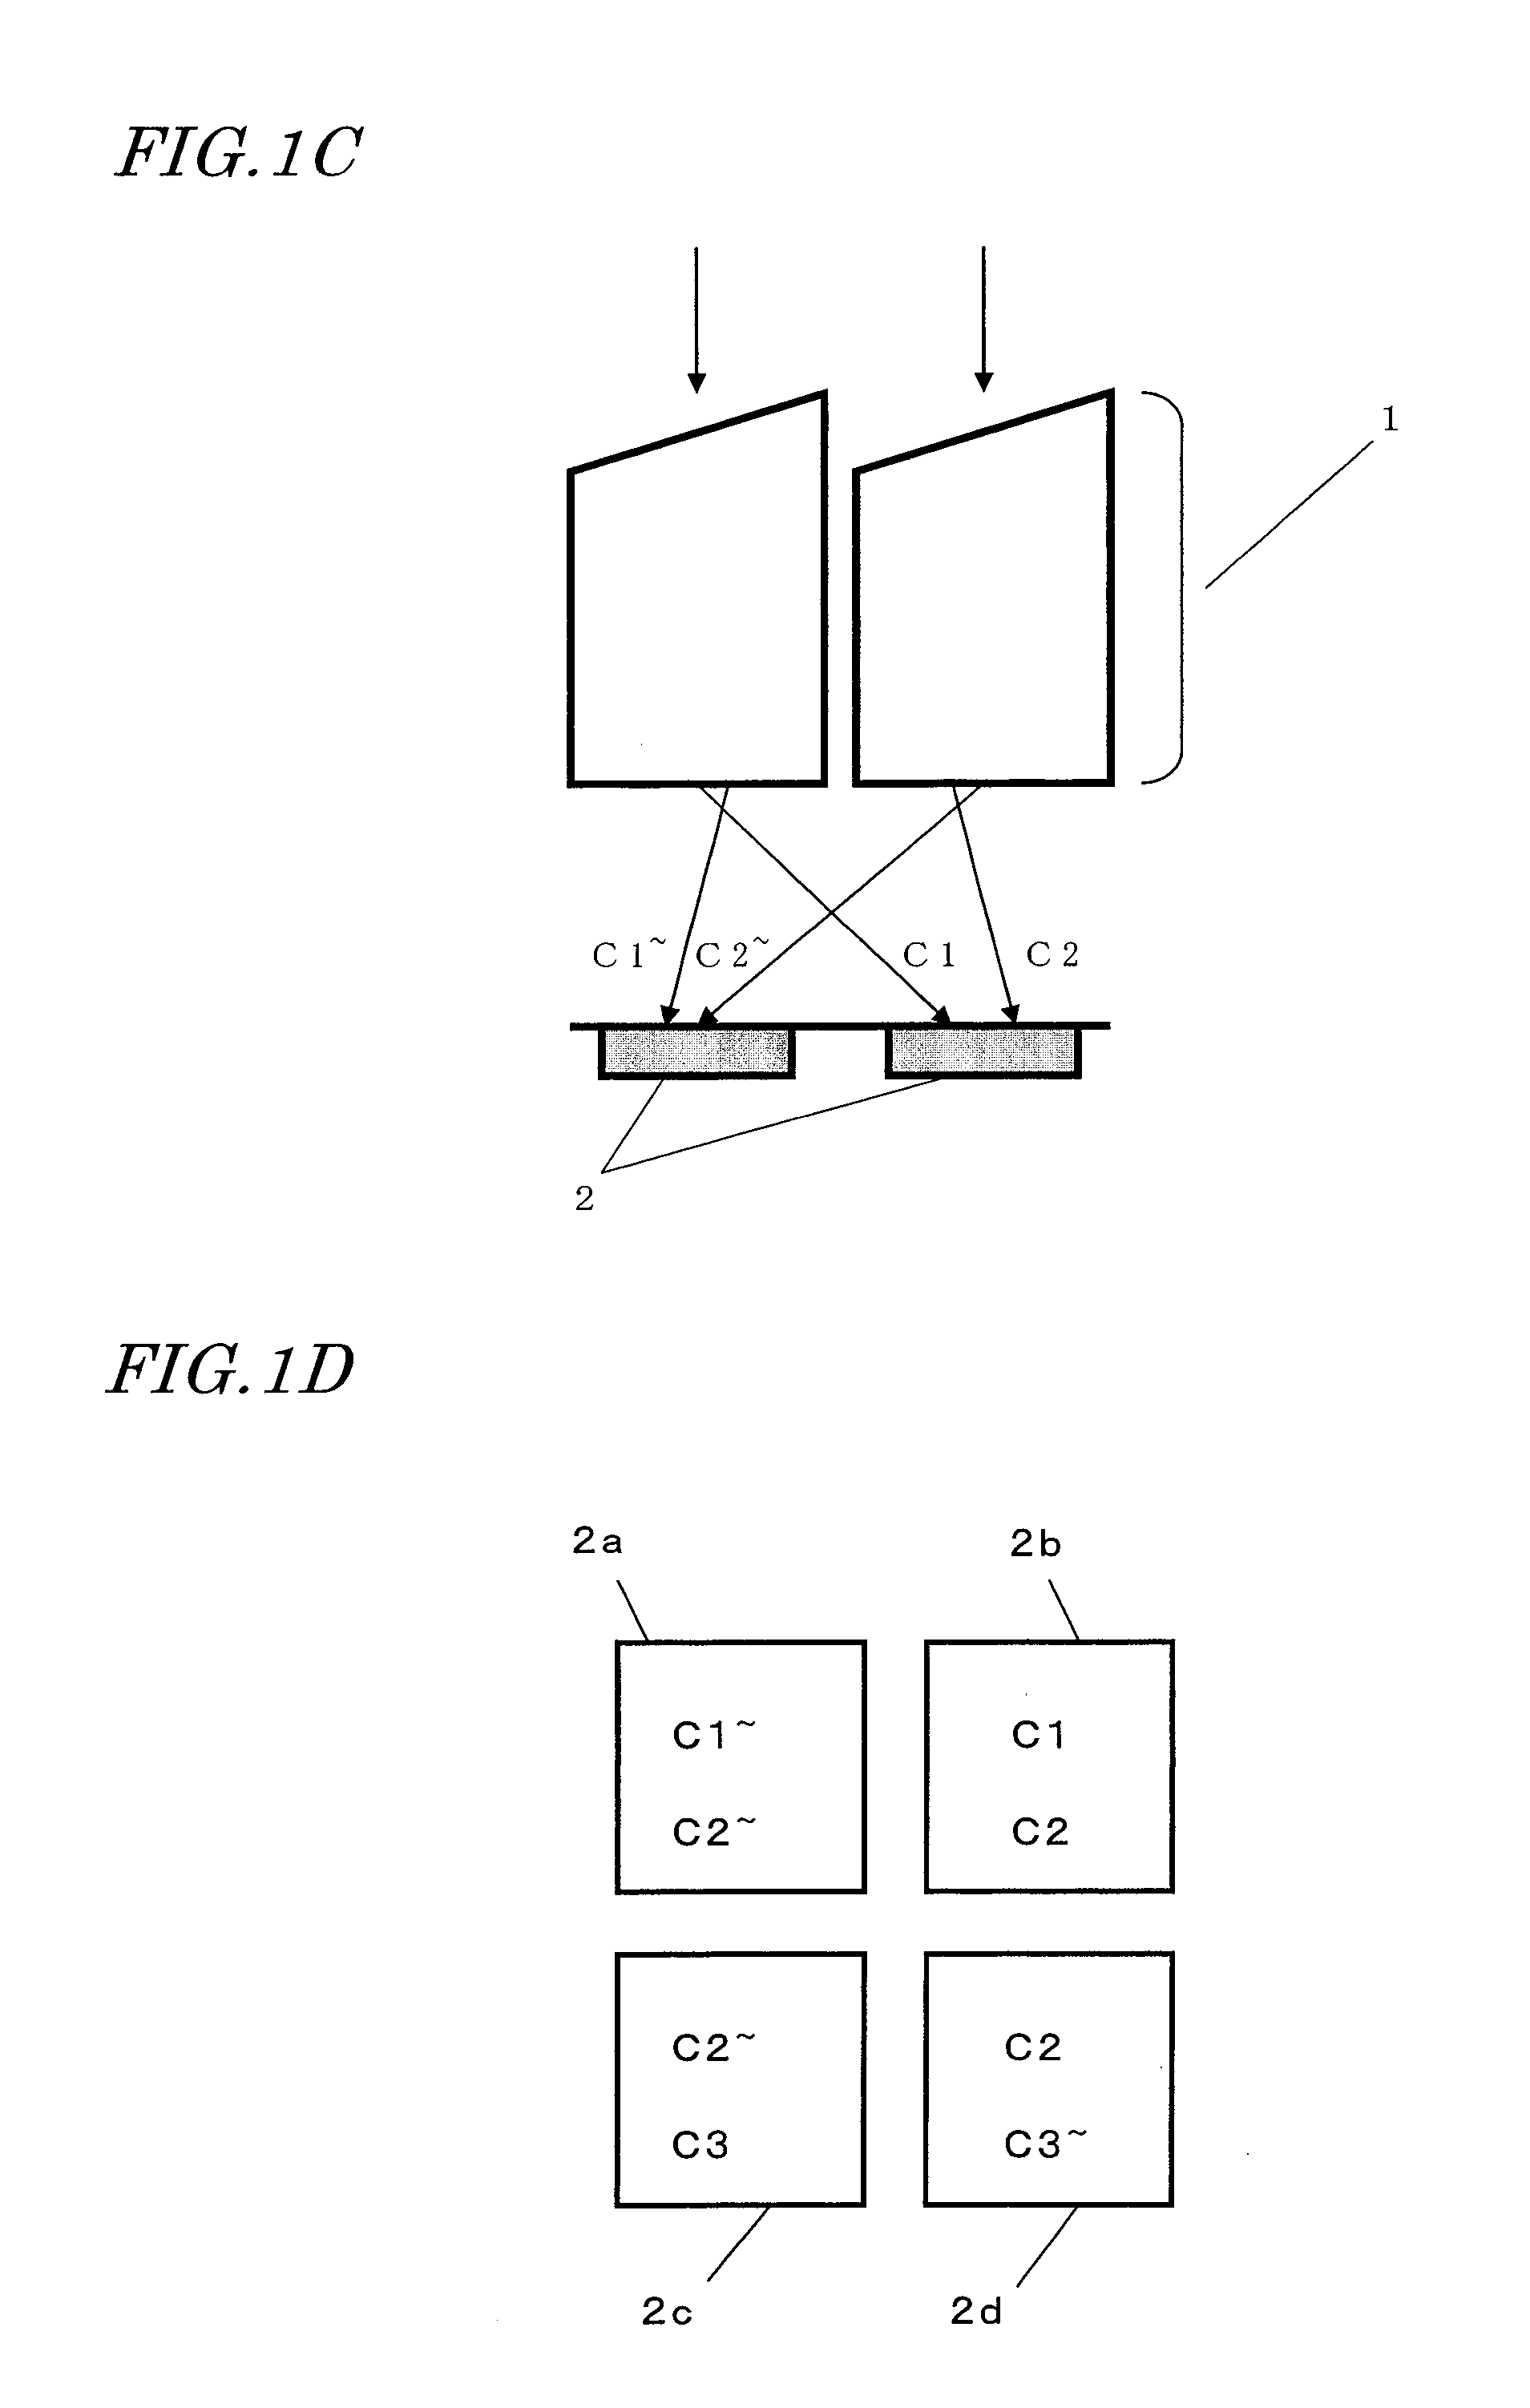 Solid-state imaging device including arrays of optical elements and photosensitive cells